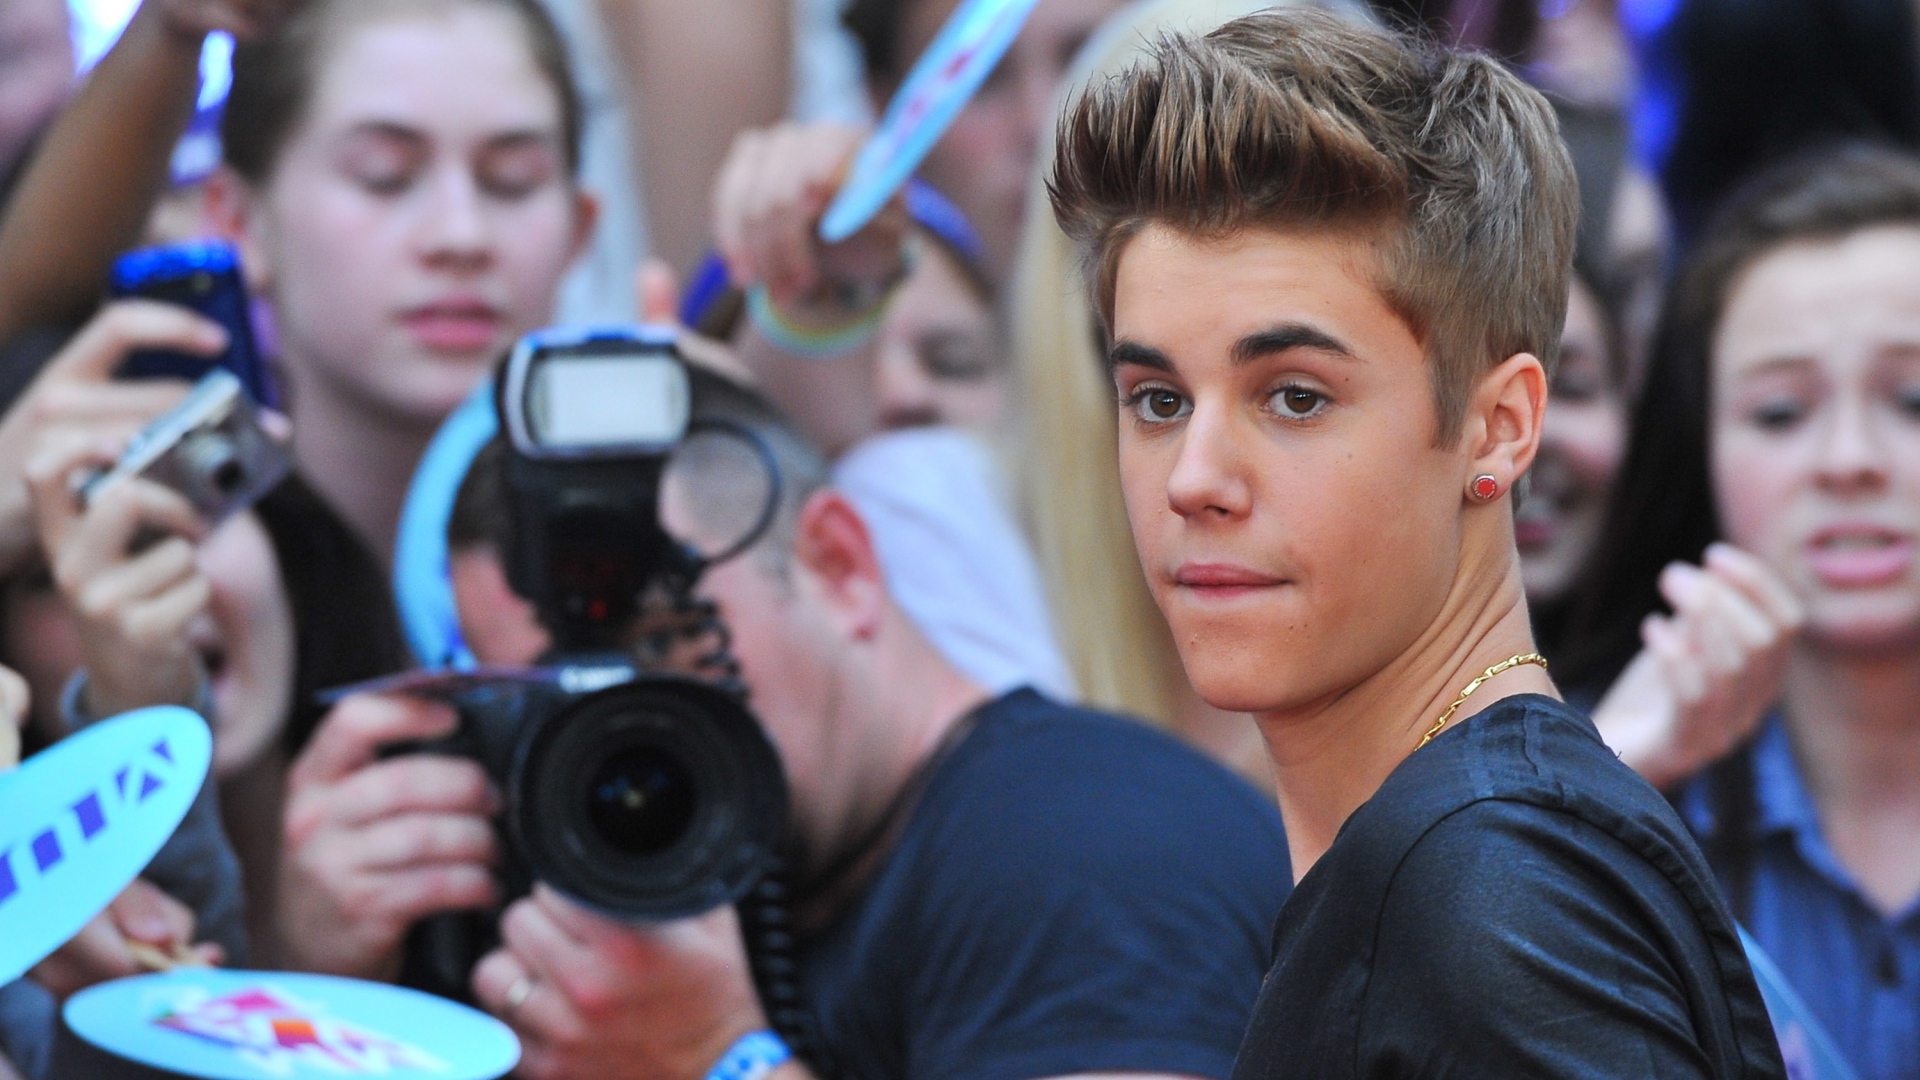 How To Contact With Justin Bieber Fans Club